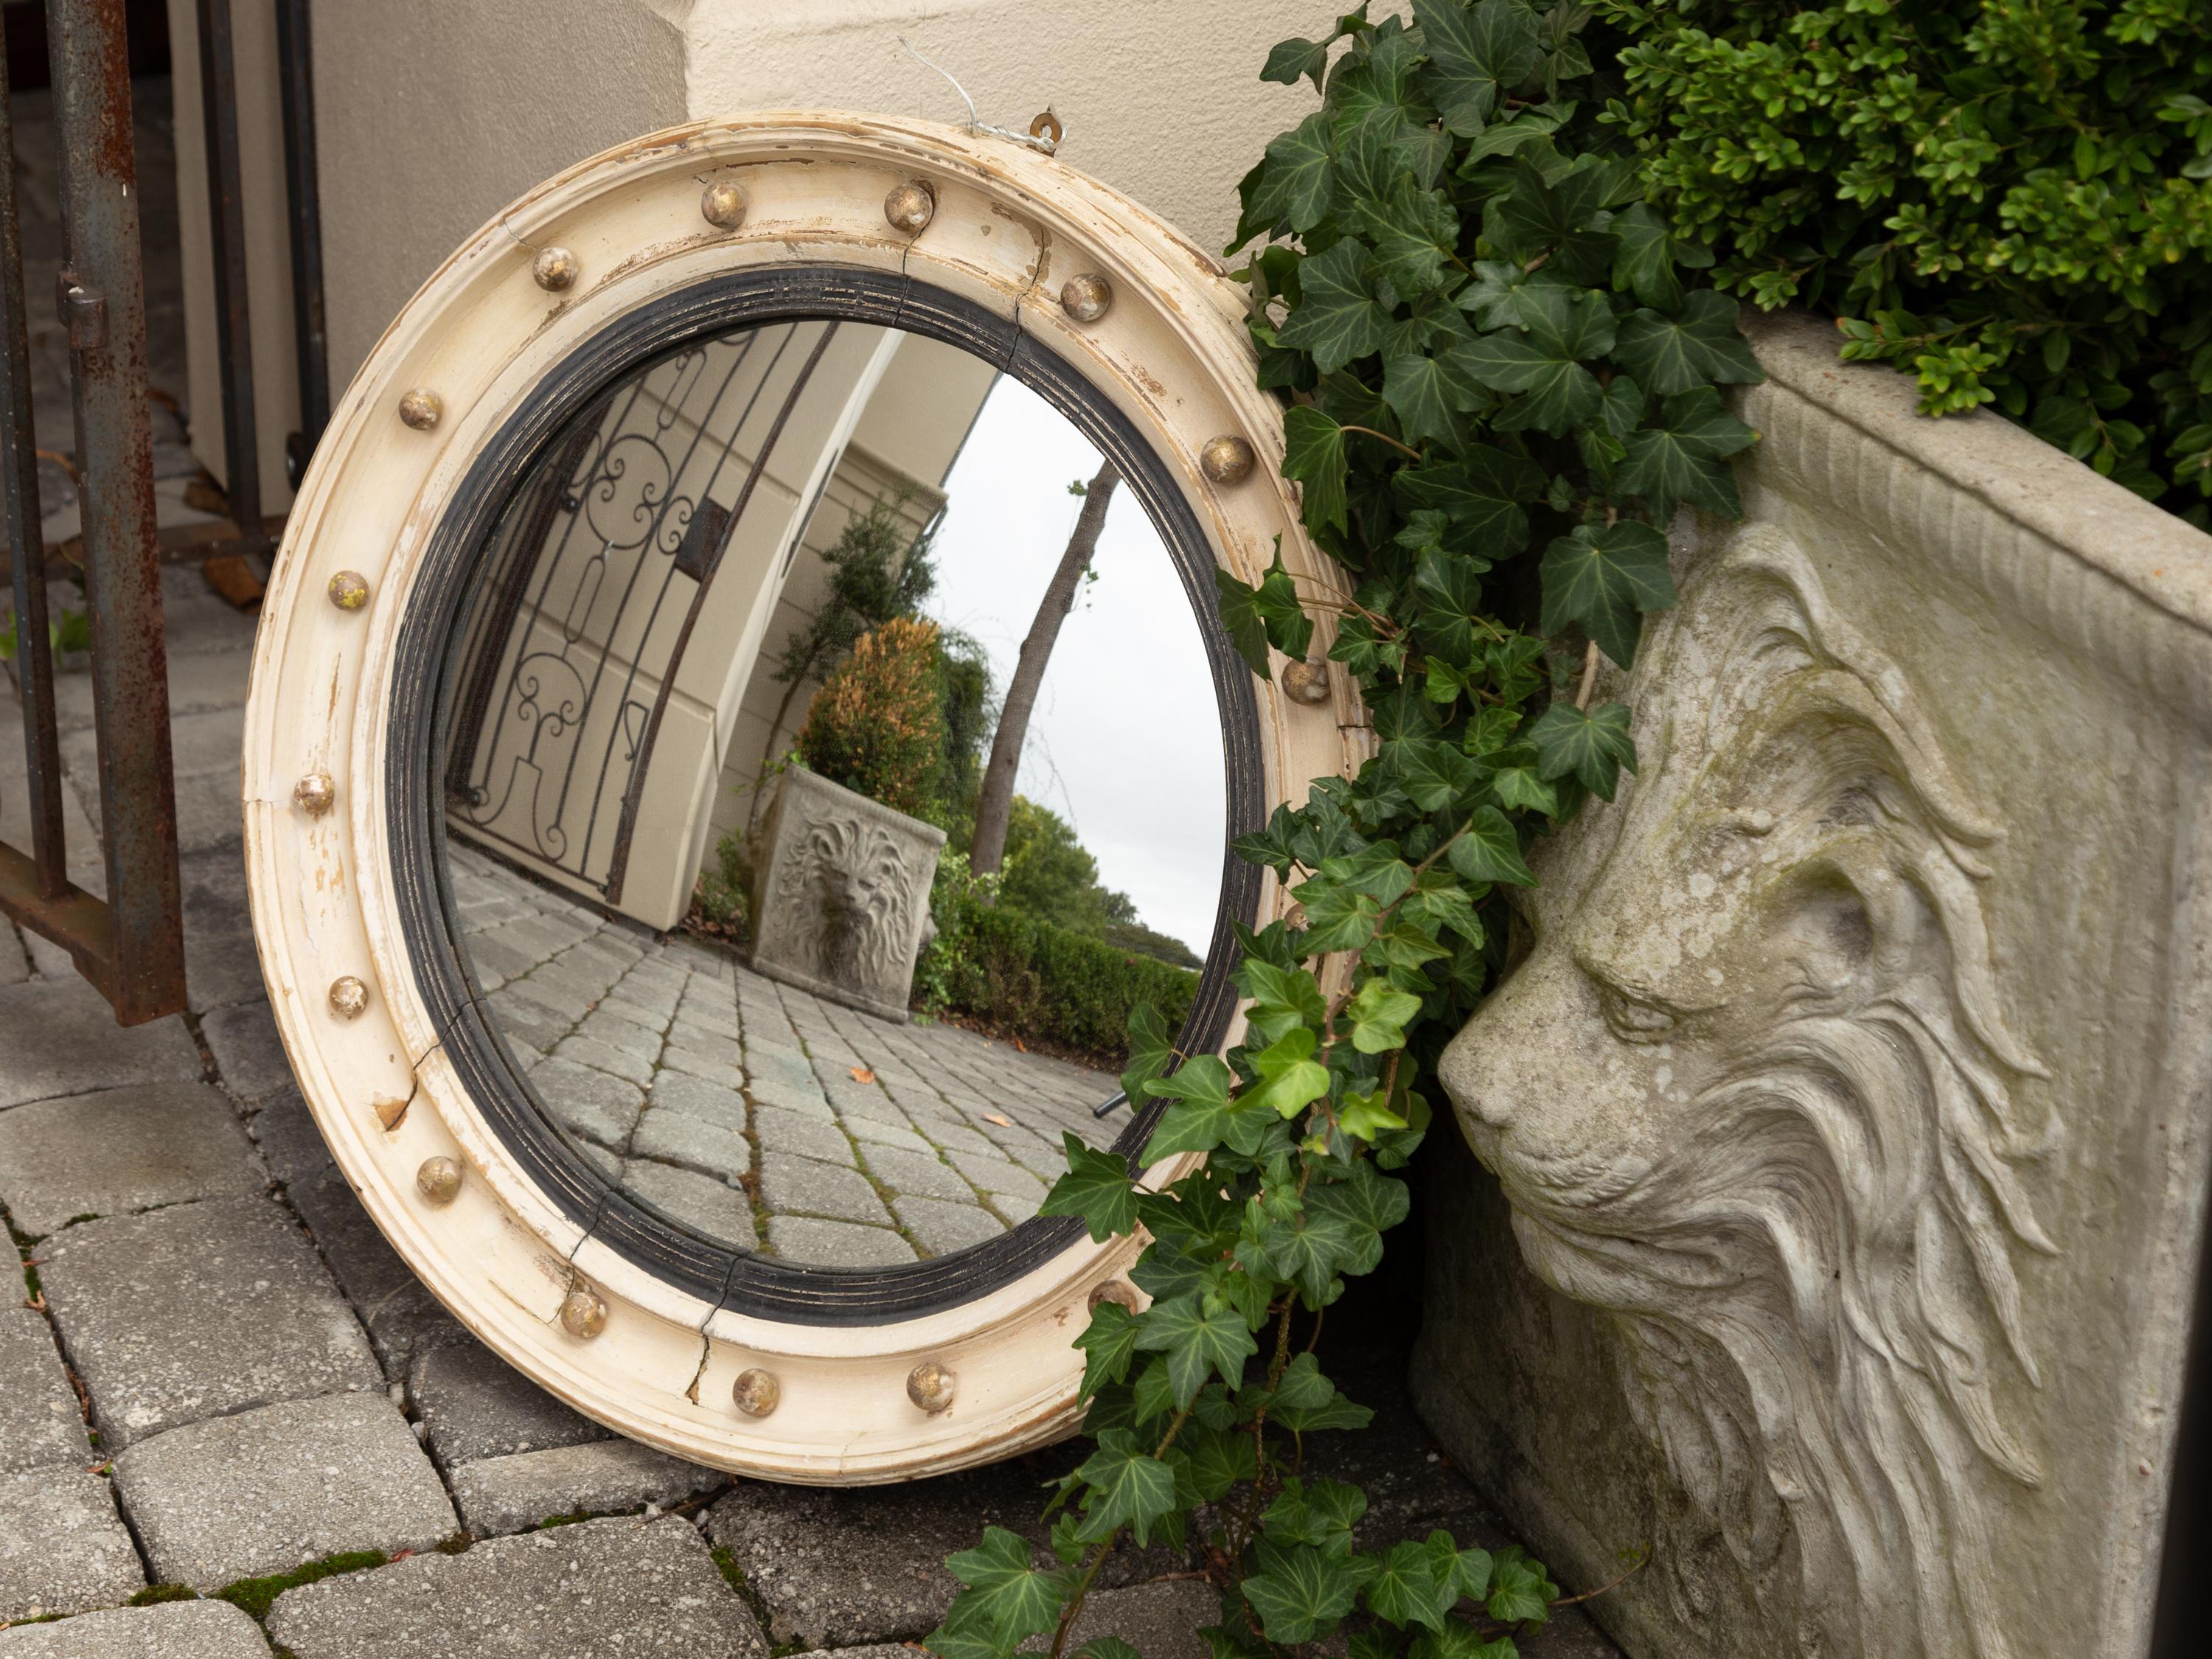 An English painted wood bullseye convex mirror from the late 19th century with ebonized reeded accents and distressed finish. Born in England during the third quarter of the 19th century, this stylish circular mirror features a convex mirror plate,